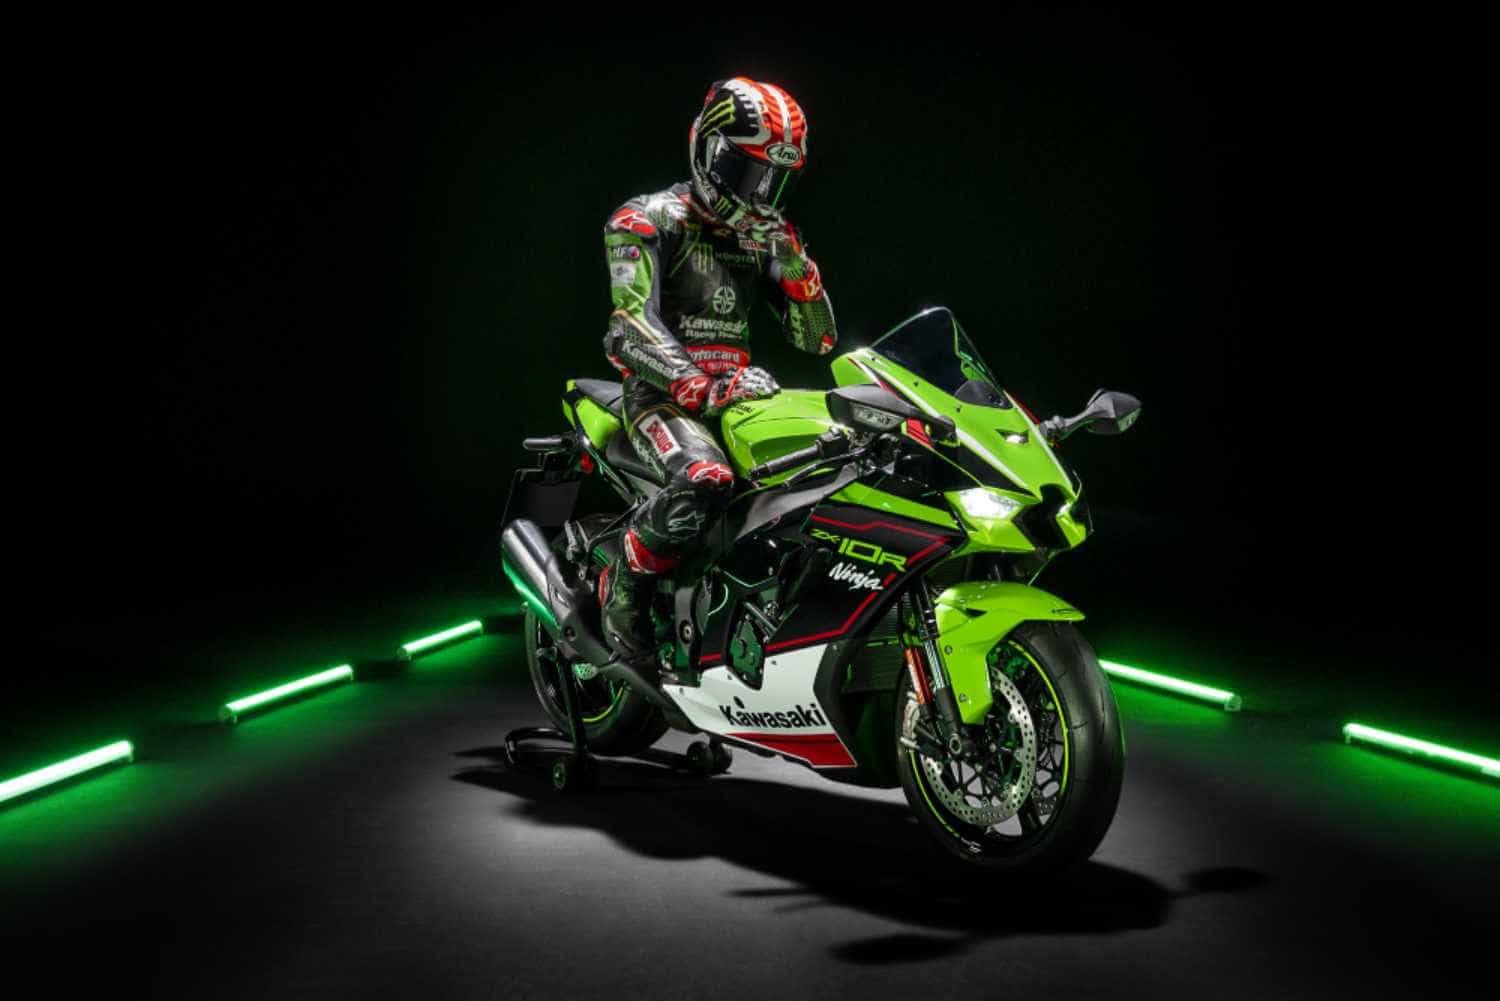 2023 Kawasaki Ninja ZX10R bike launched Check price, features, mileage and more DETAILS